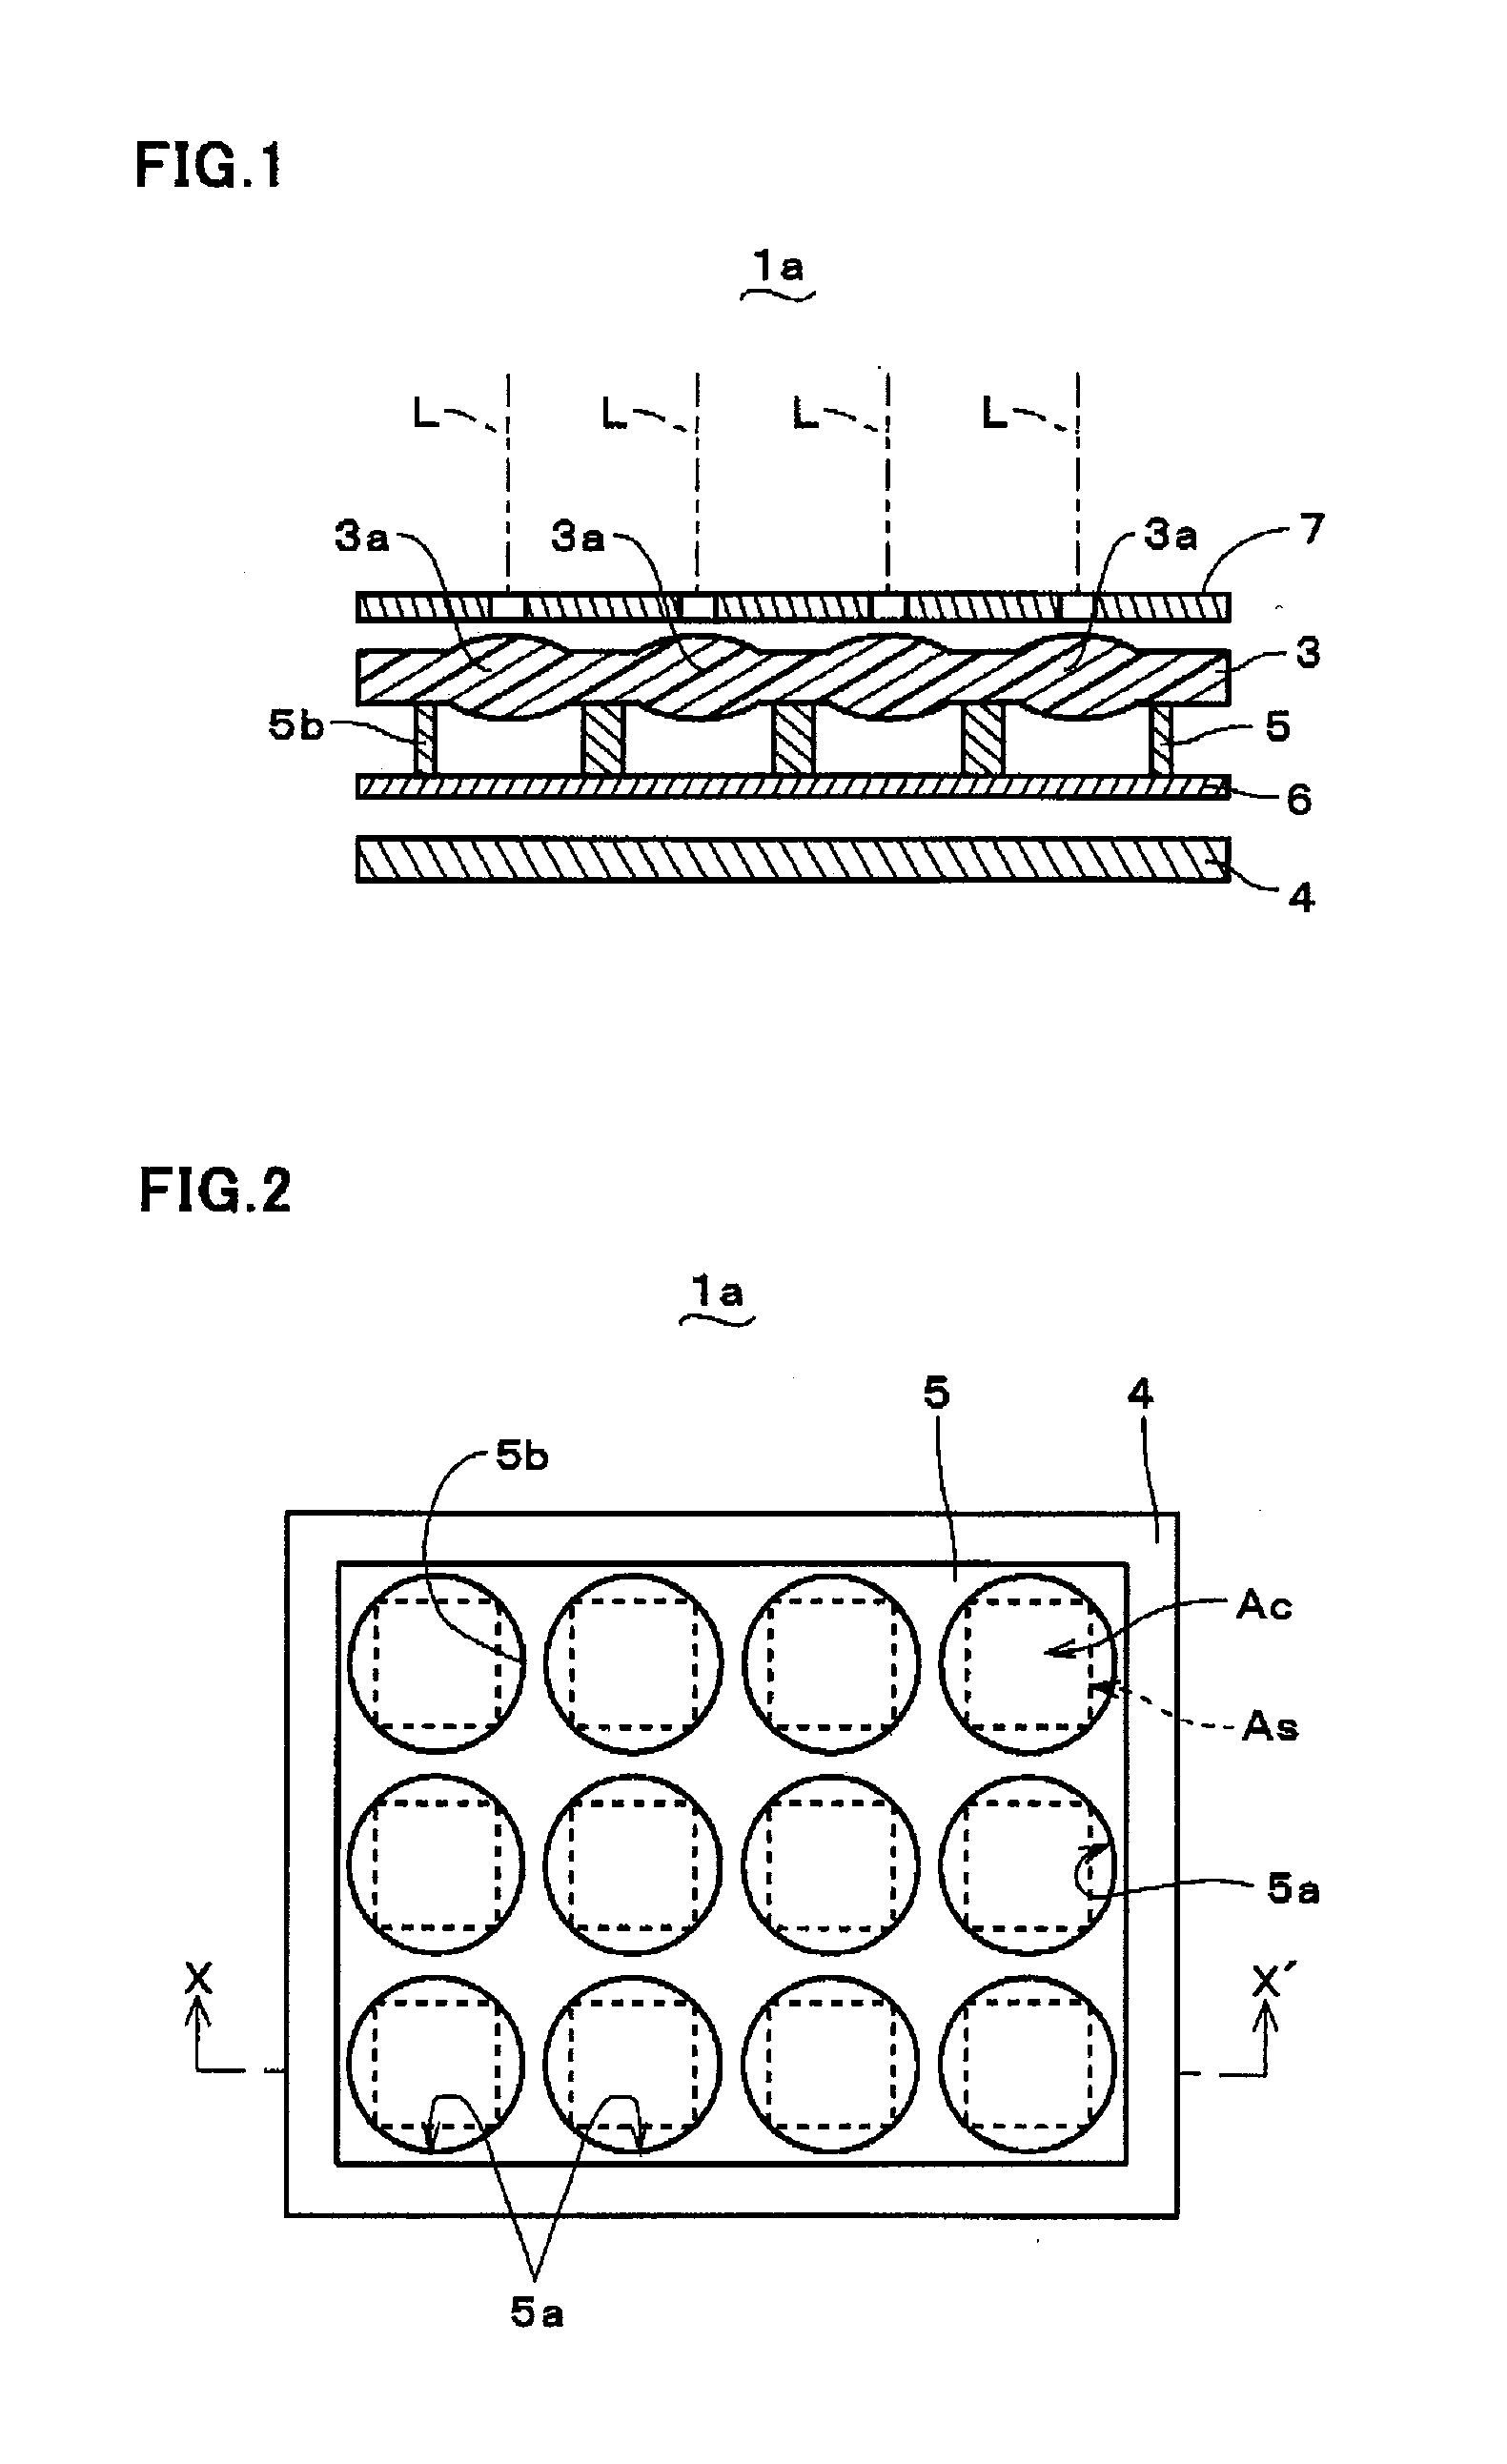 Compound-Eye Imaging Device